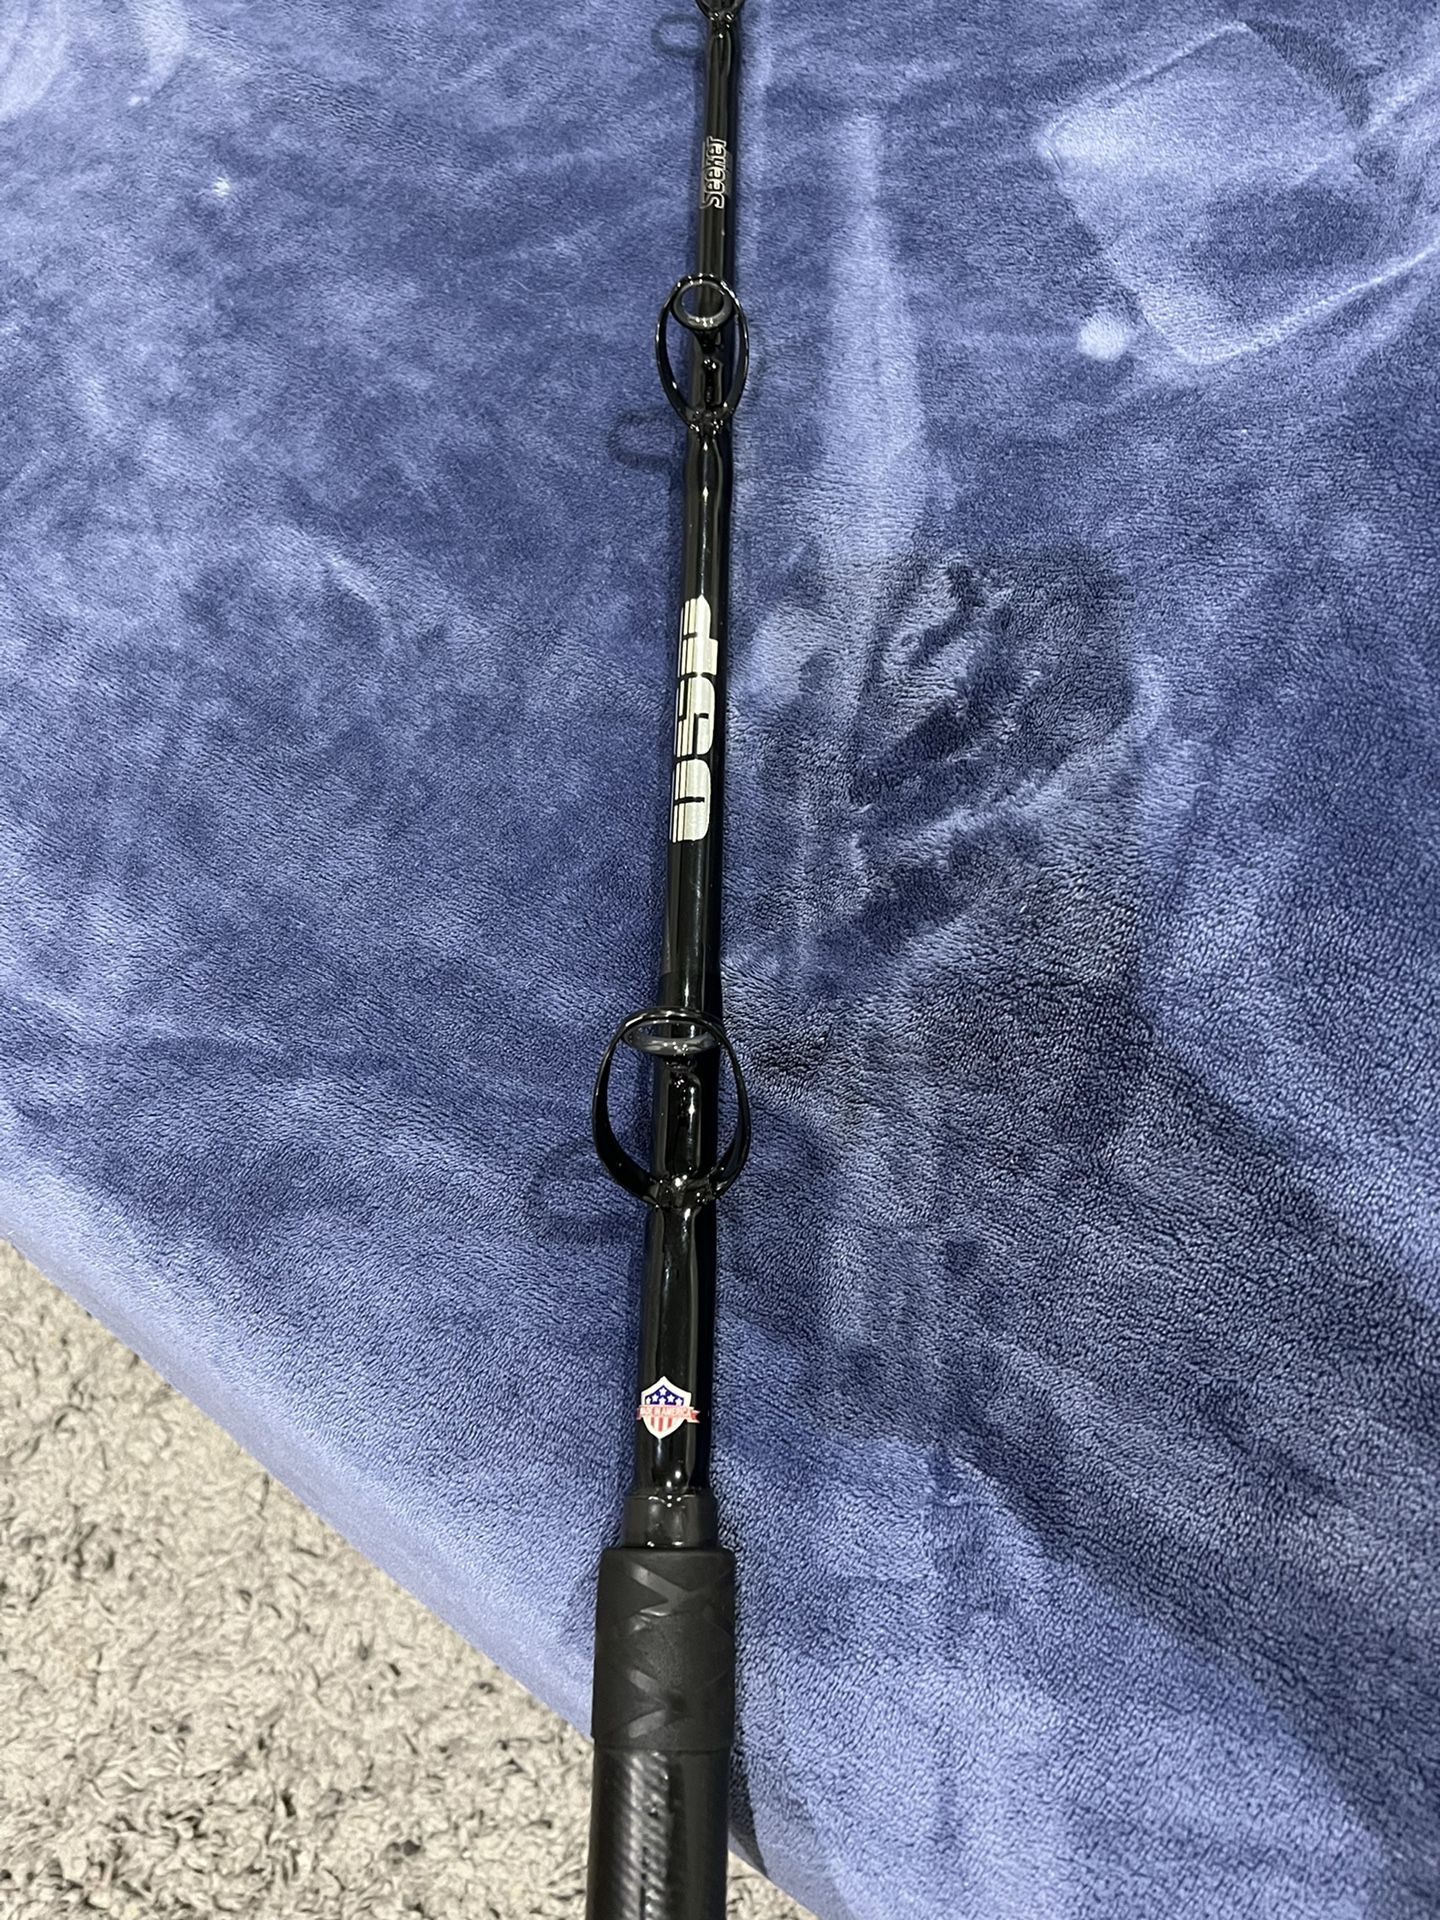 7’3 Seeker OSP 1X3 Factory Wrapped Fishing Rail Rod. Hardly Used. Great  Condition. for Sale in Gardena, CA - OfferUp